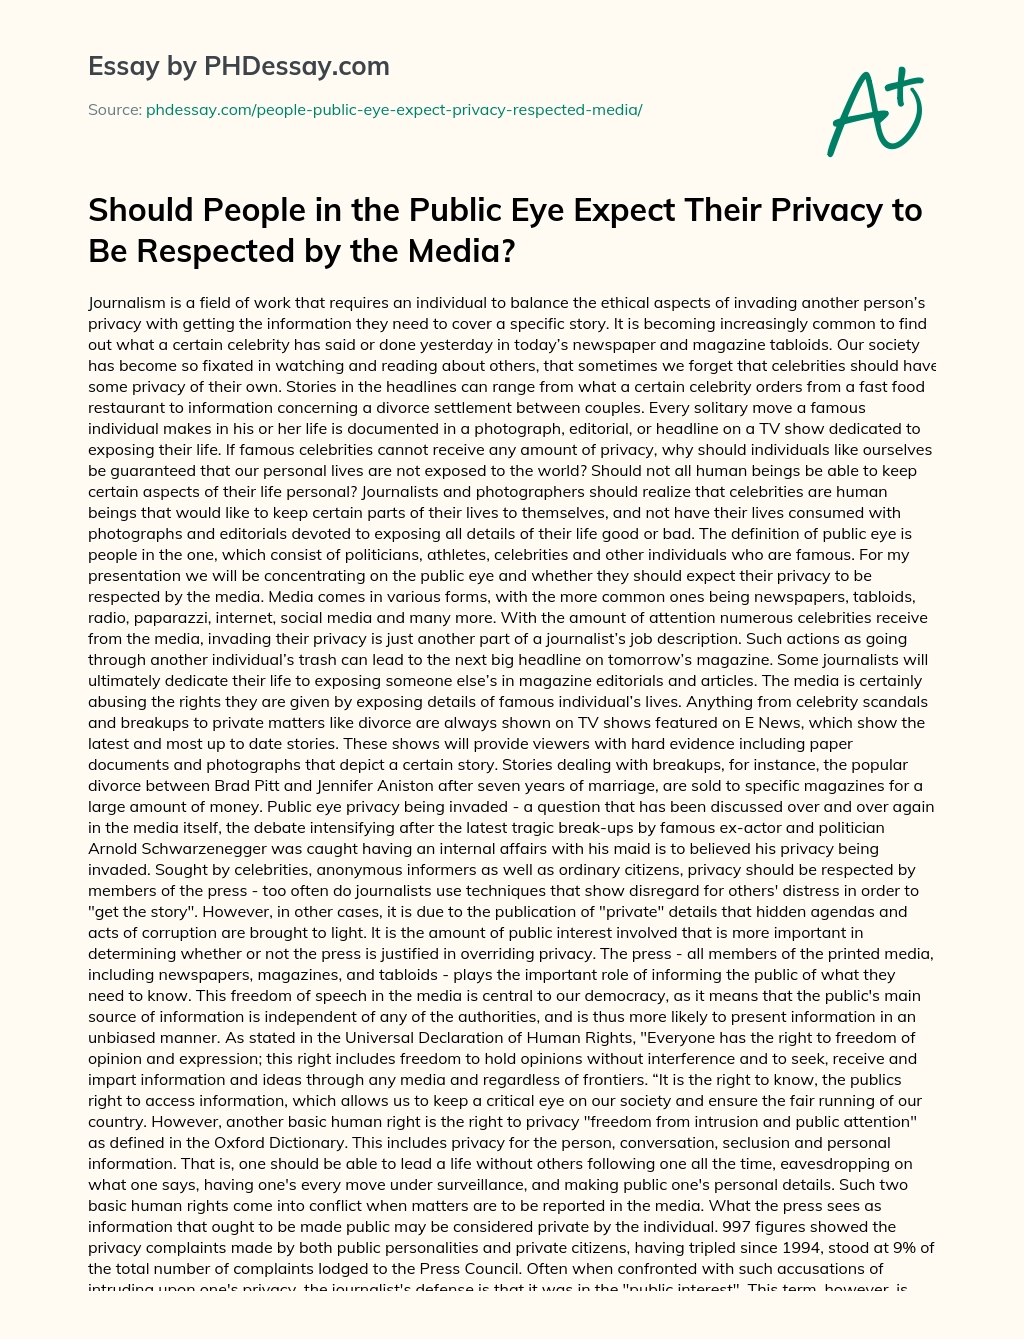 Should People in the Public Eye Expect Their Privacy to Be Respected by the Media? essay